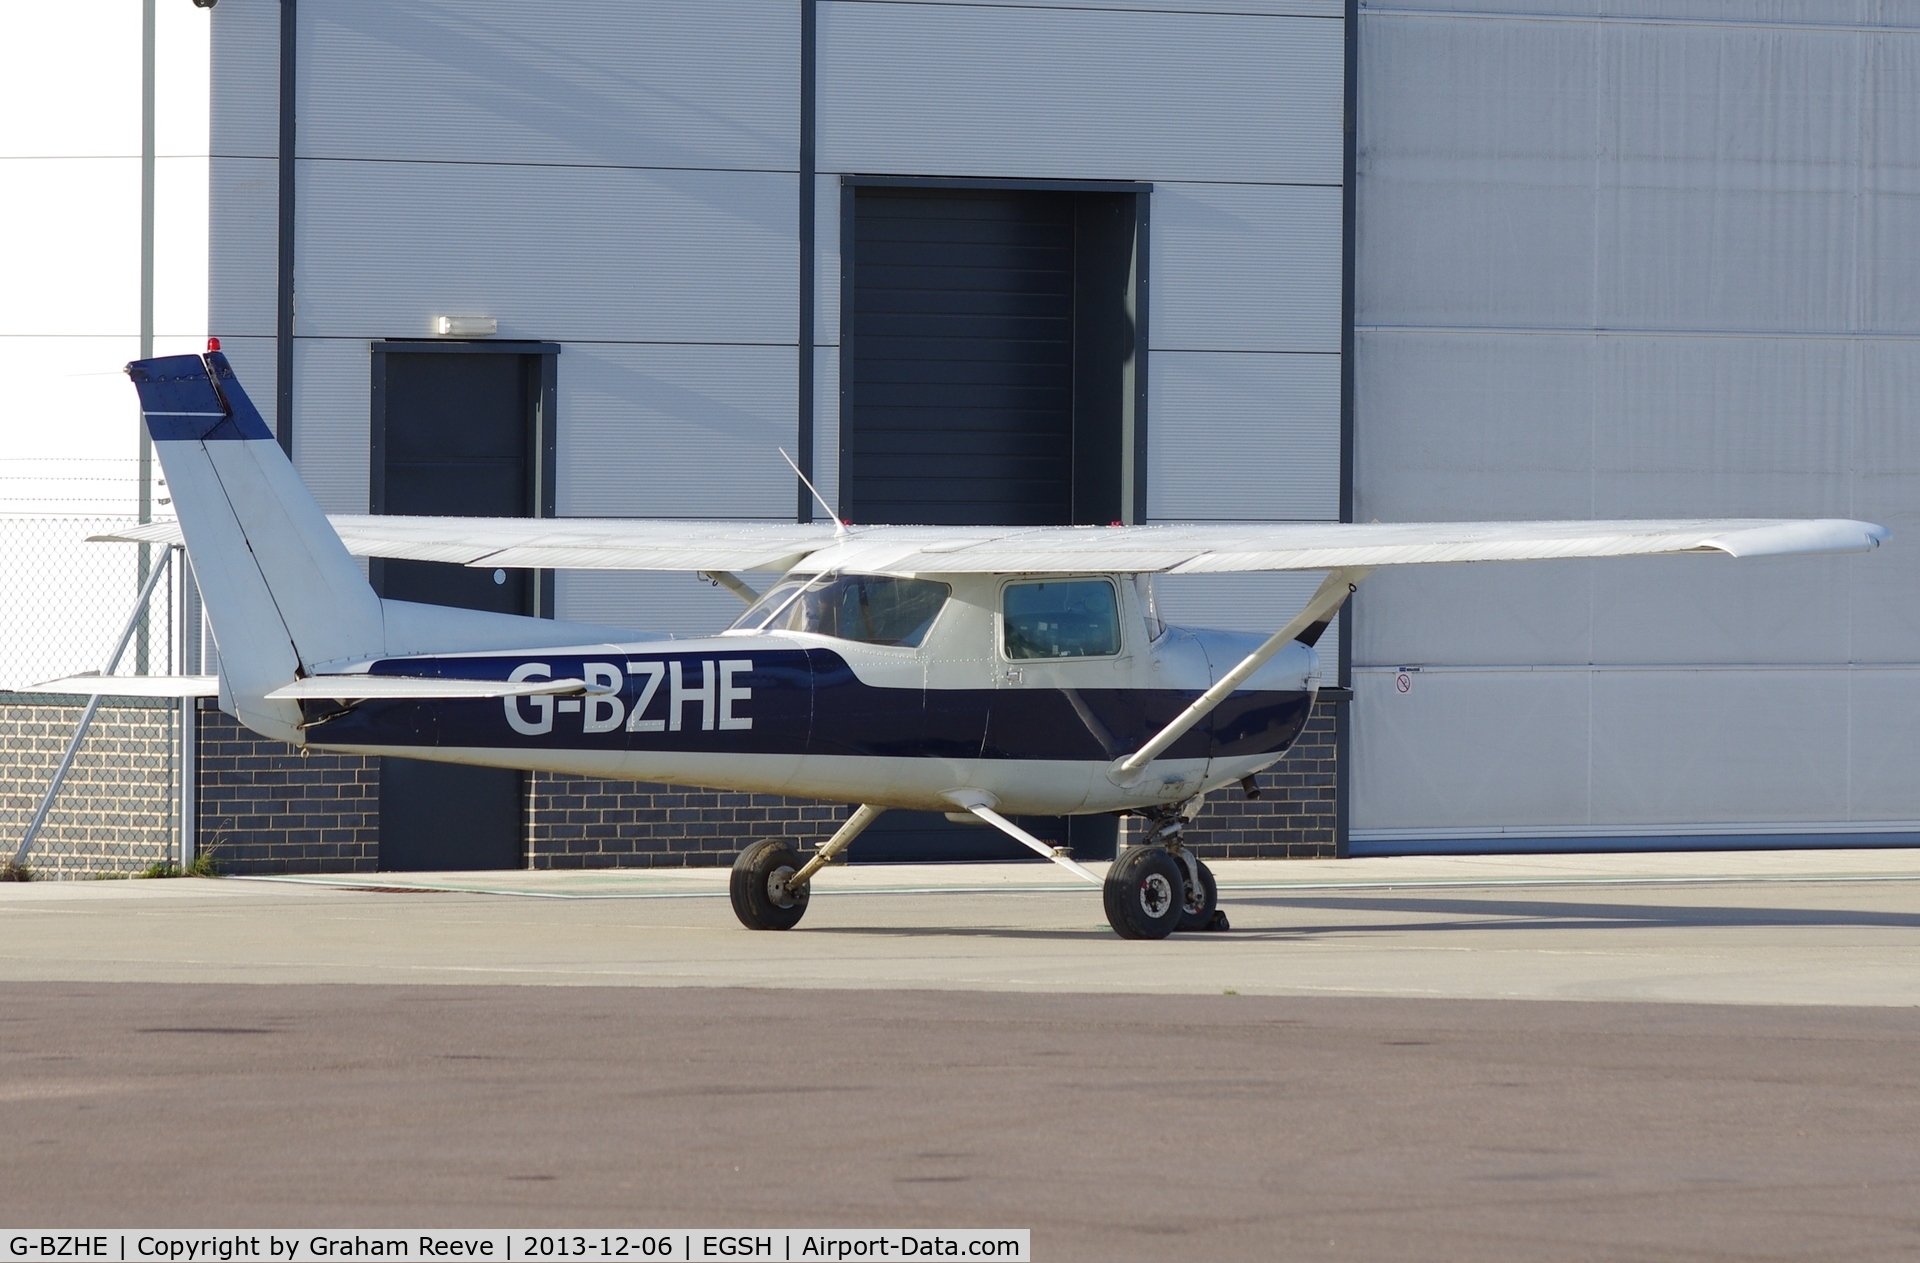 G-BZHE, 1978 Cessna 152 C/N 152-81303, Parked at Norwich.